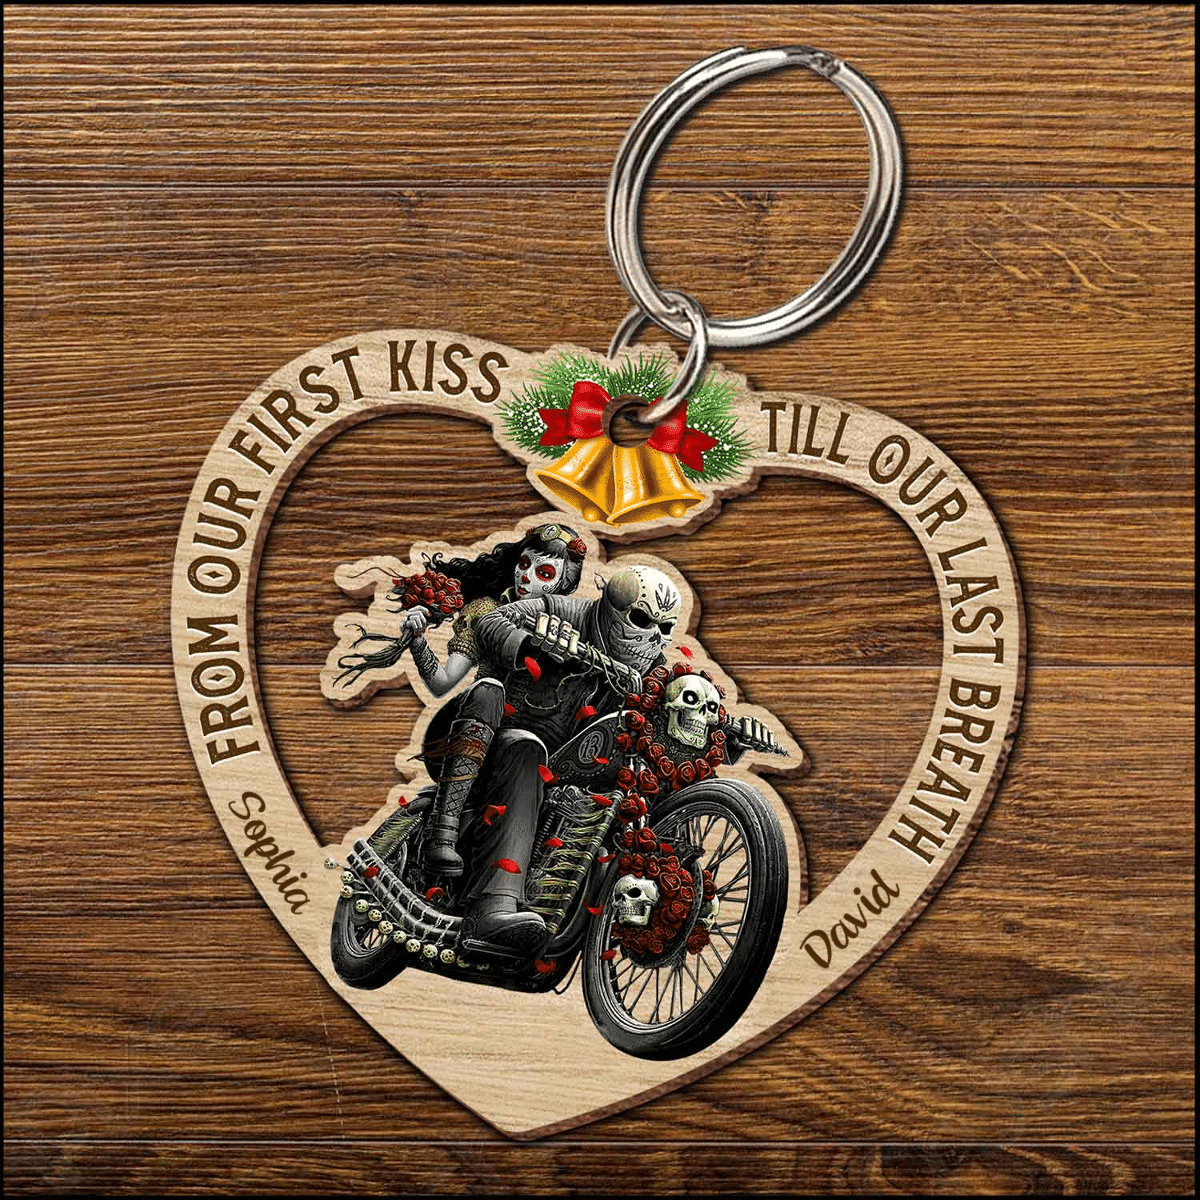 Skull Biker Wooden Couple Keychain/ From Our First Kiss Keychain for Husband/ Boyfriend